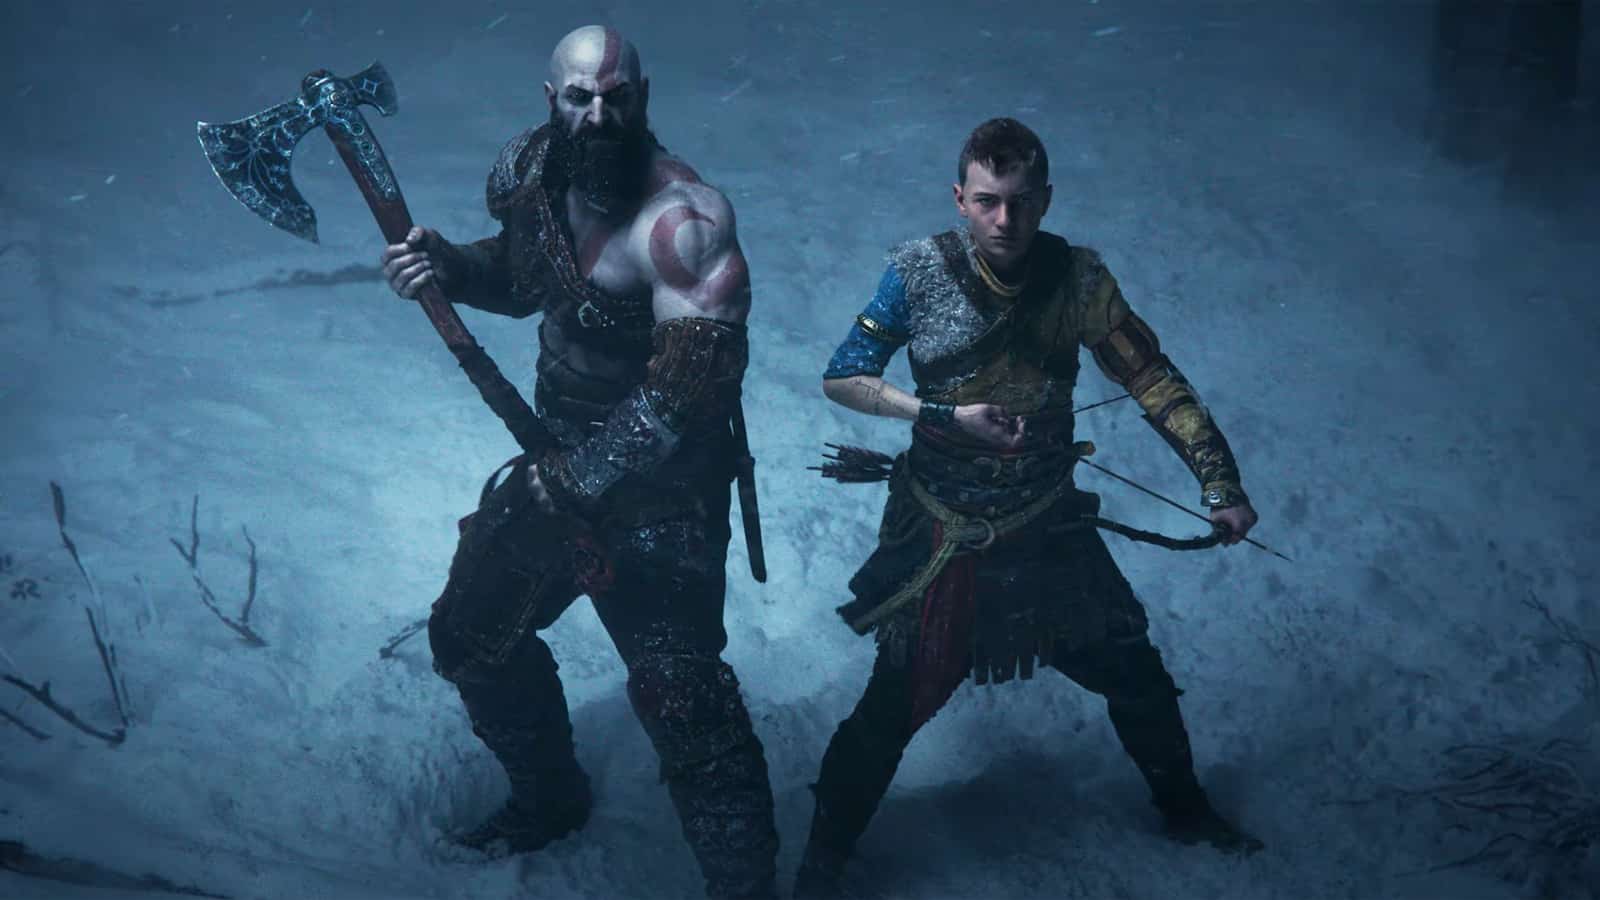 God Of War Ragnarok All Editions Revealed - Which is your pick